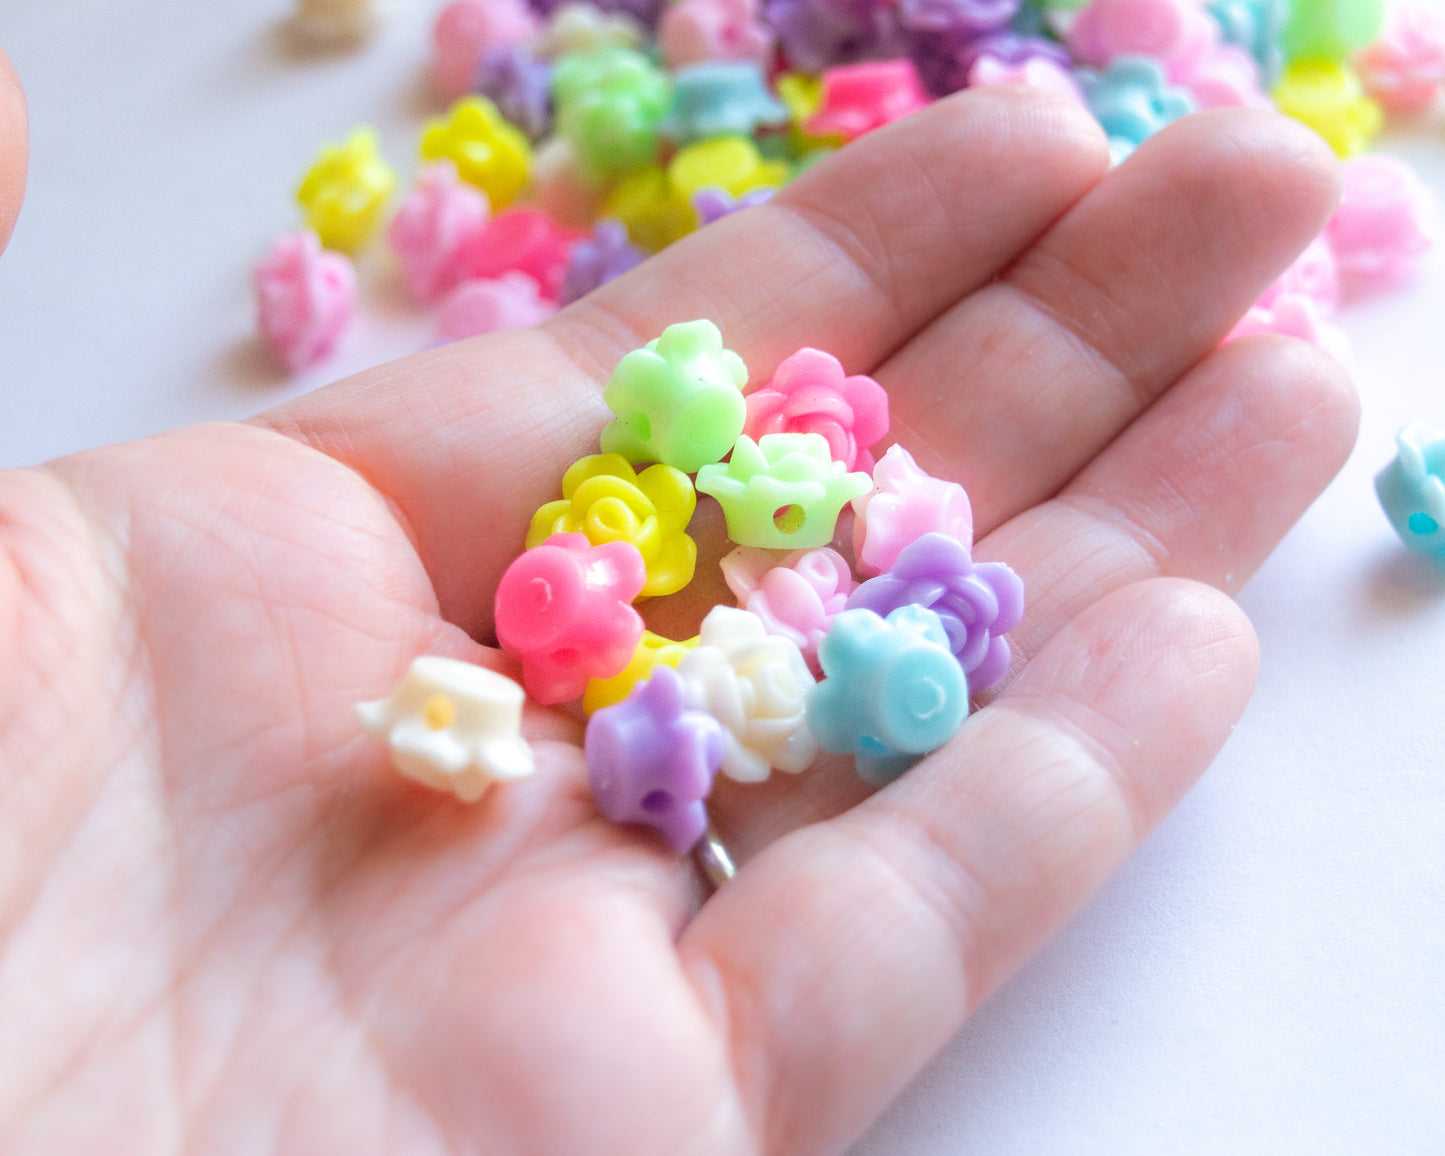 12.5mm x 8mm Rose Beads in Pastel Colored Acrylic